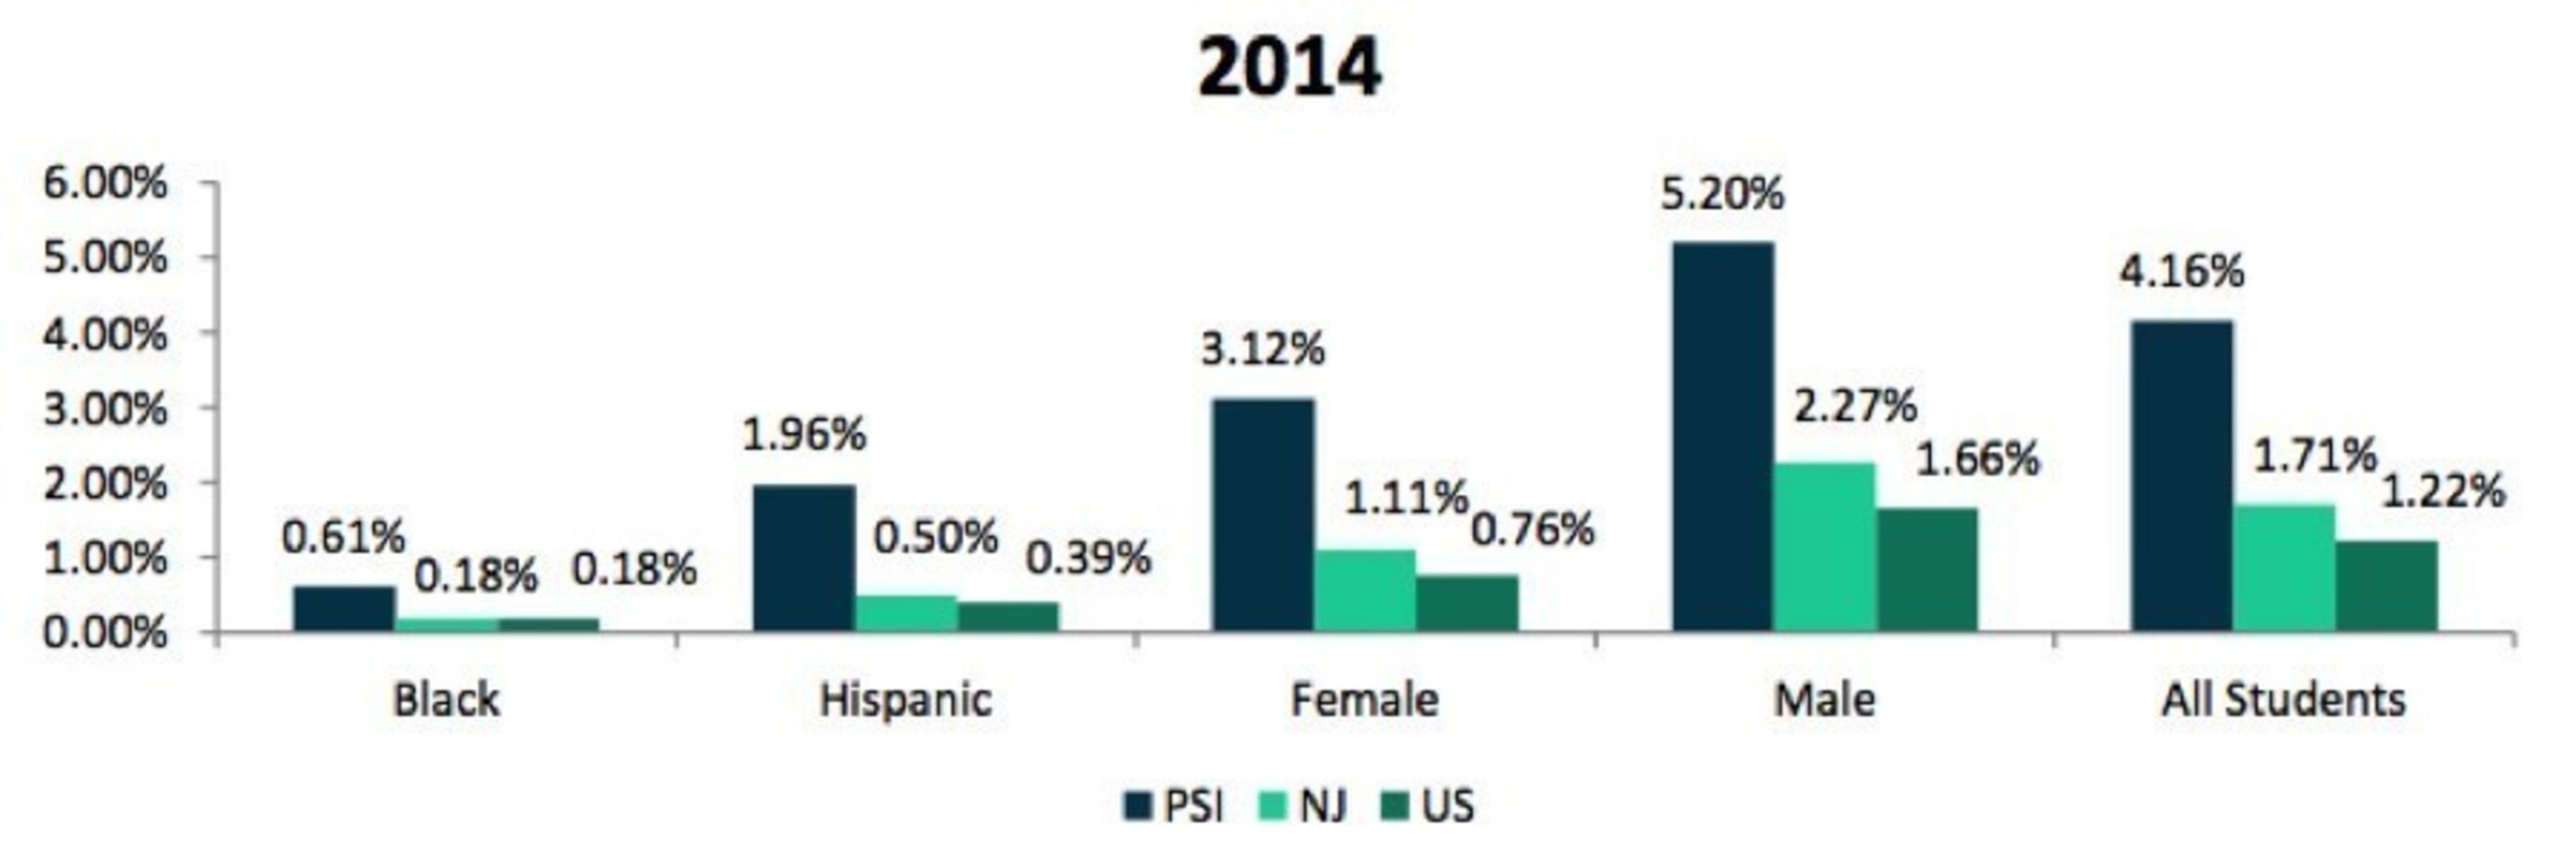 Comparison of PSI, NJ, and US Student Pass Rates, AP Physics - 2014. Source: The College Board, US Census Bureau, and NJDOE.